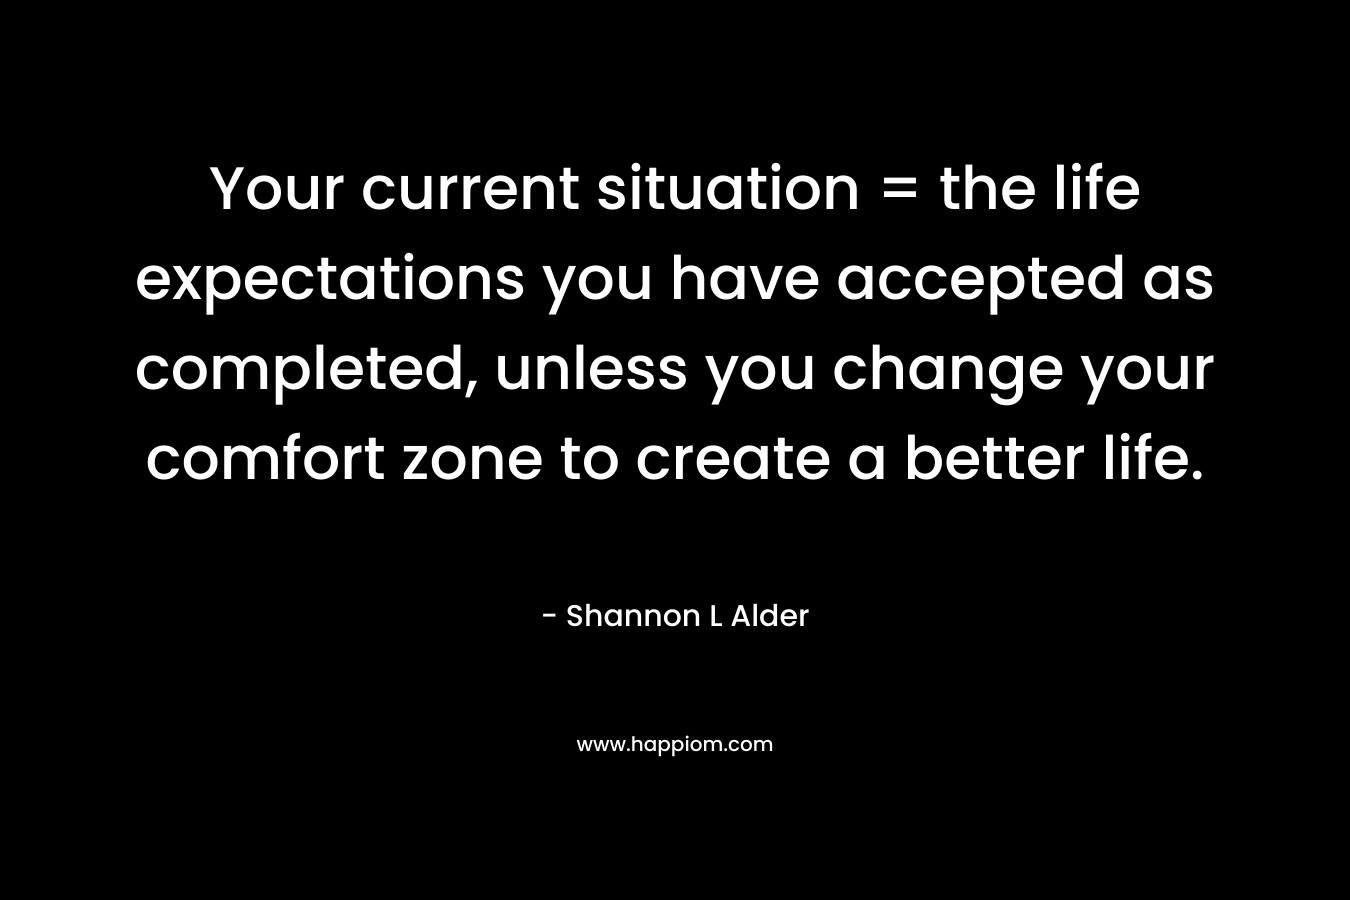 Your current situation = the life expectations you have accepted as completed, unless you change your comfort zone to create a better life.